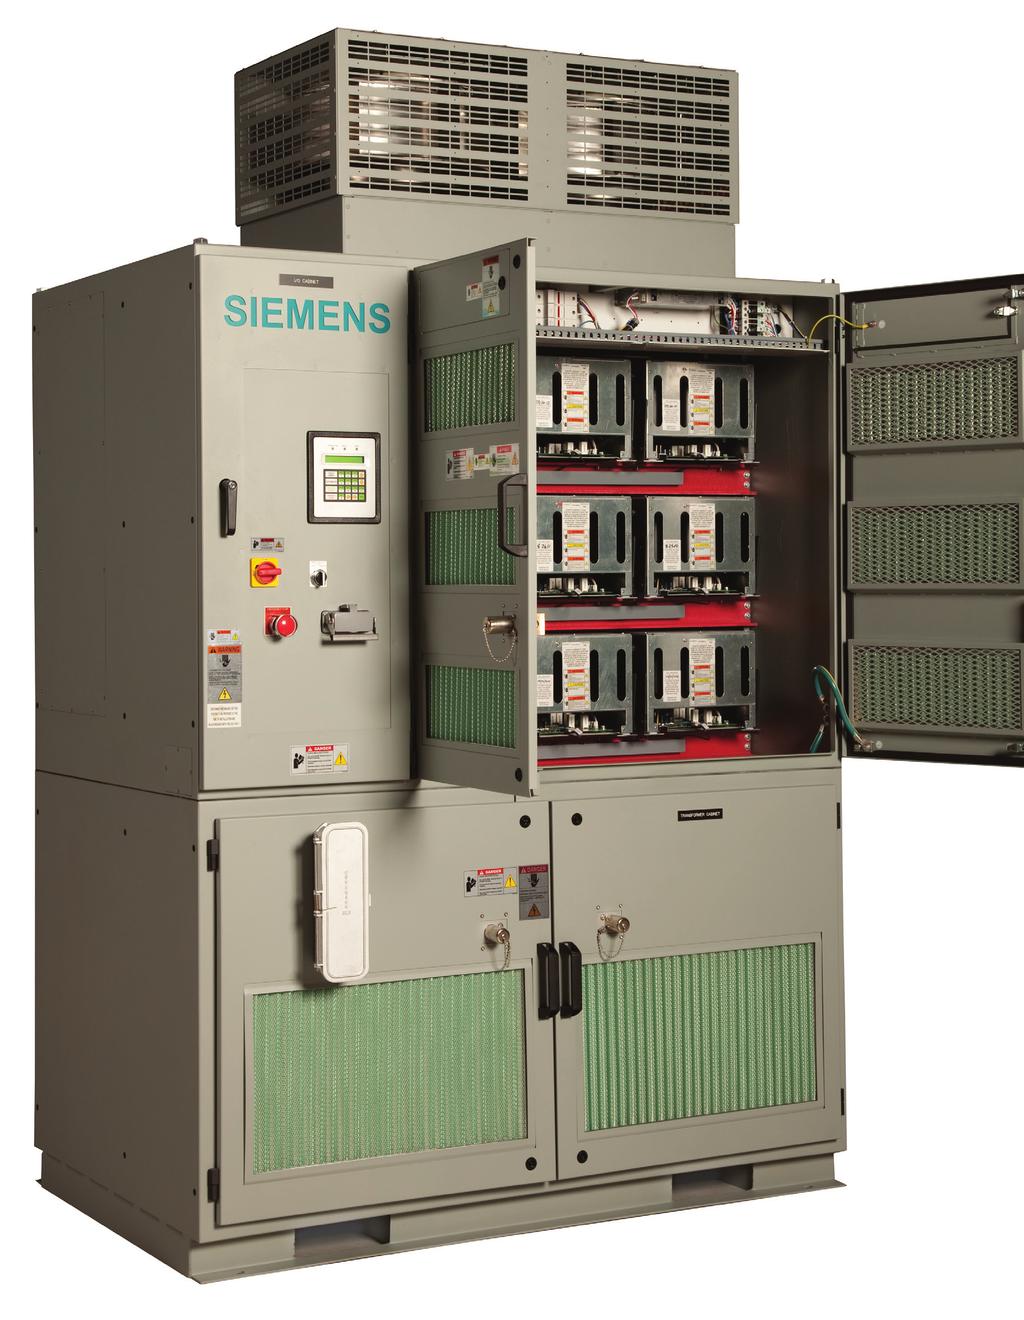 Technical data at a glance Efficiency Typical power converter: 99% Typical total drive system: 97% Input Transformer Aluminum or copper windings, forced air-cooling Line Supply Connection Input